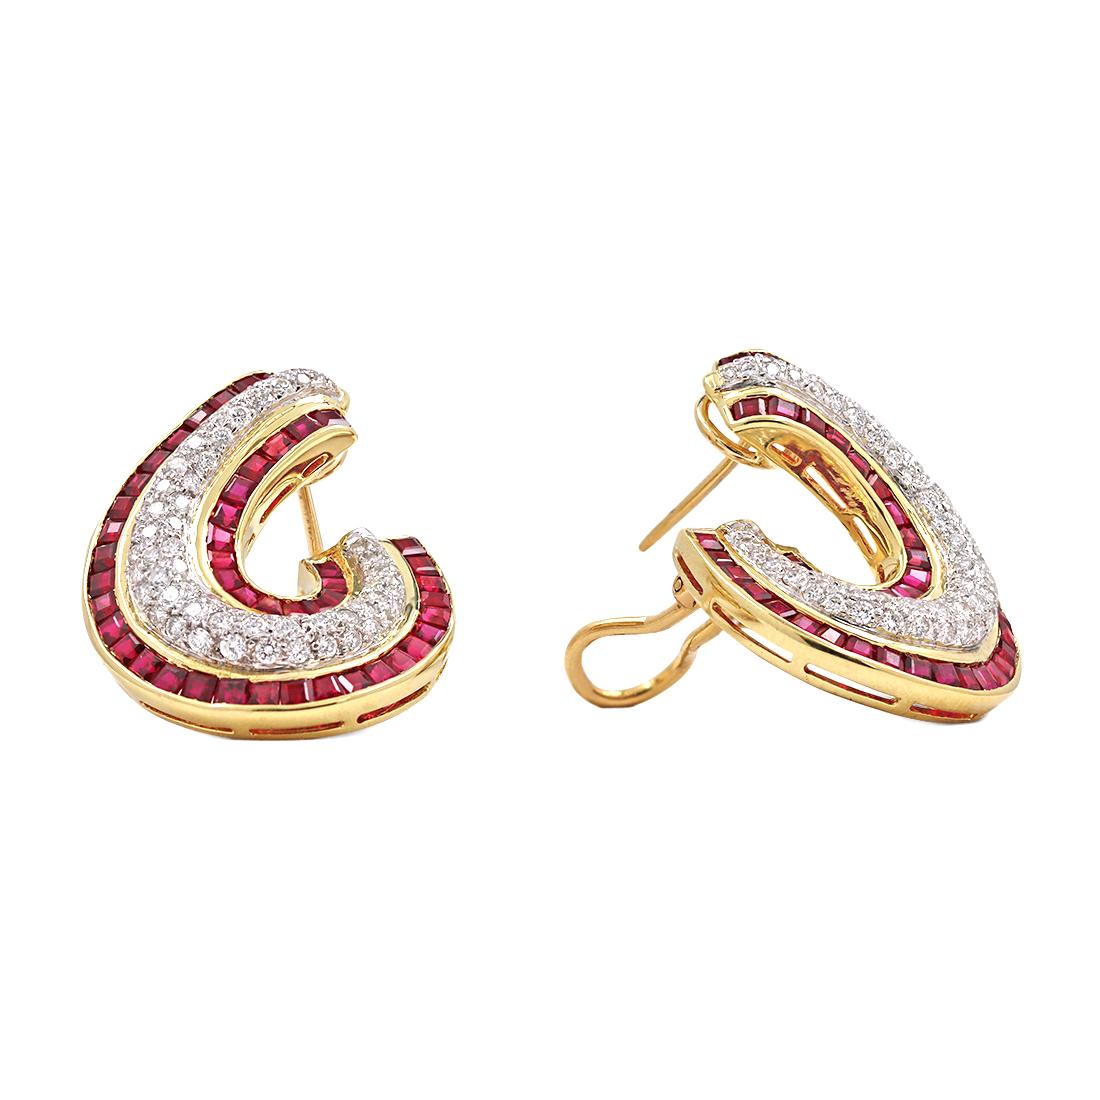 Brilliant Cut Vintage Yellow Gold Diamond and Ruby Earrings